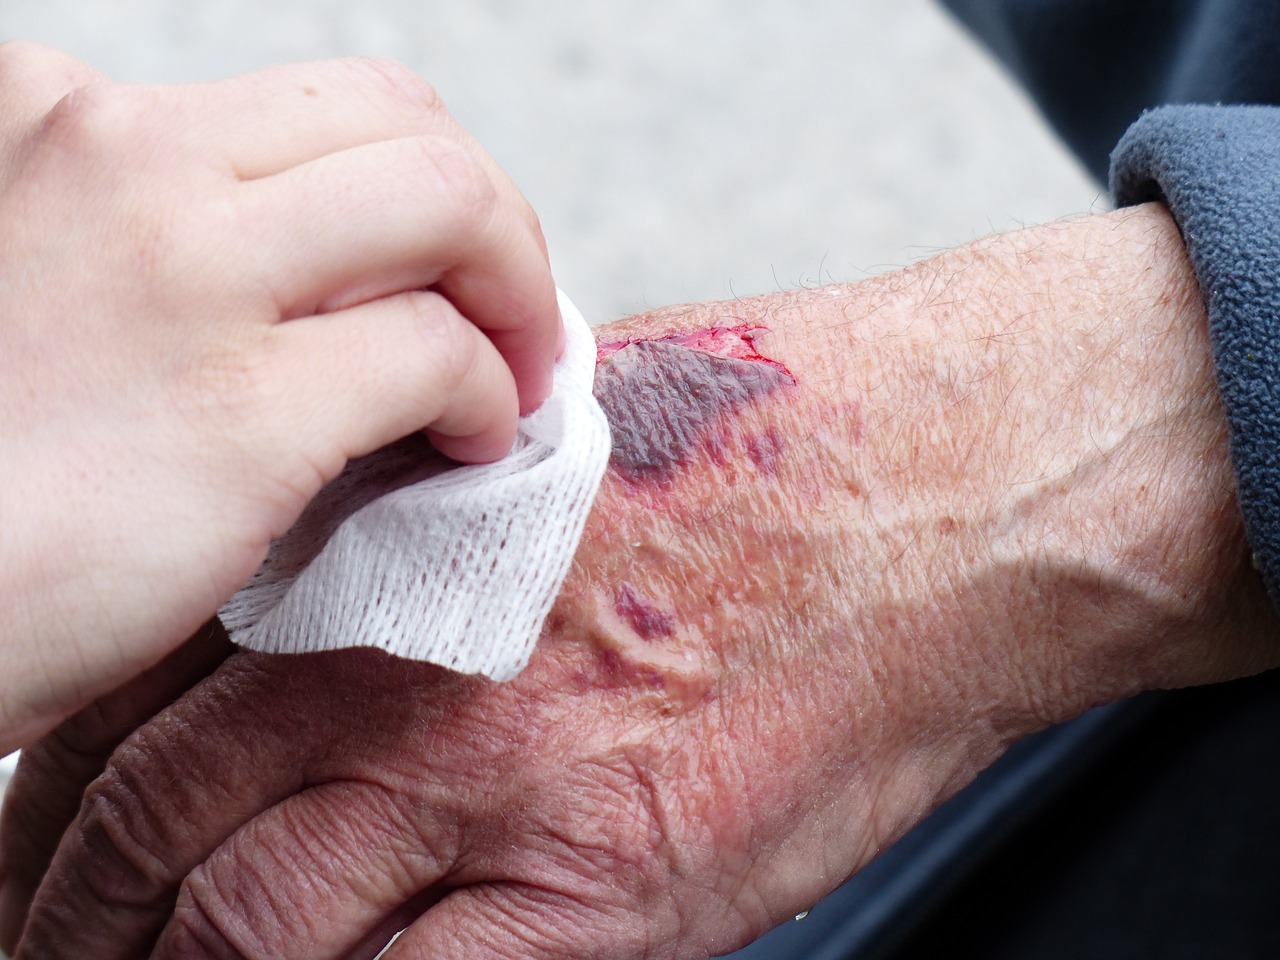 Wound care of lesion on elderly hand